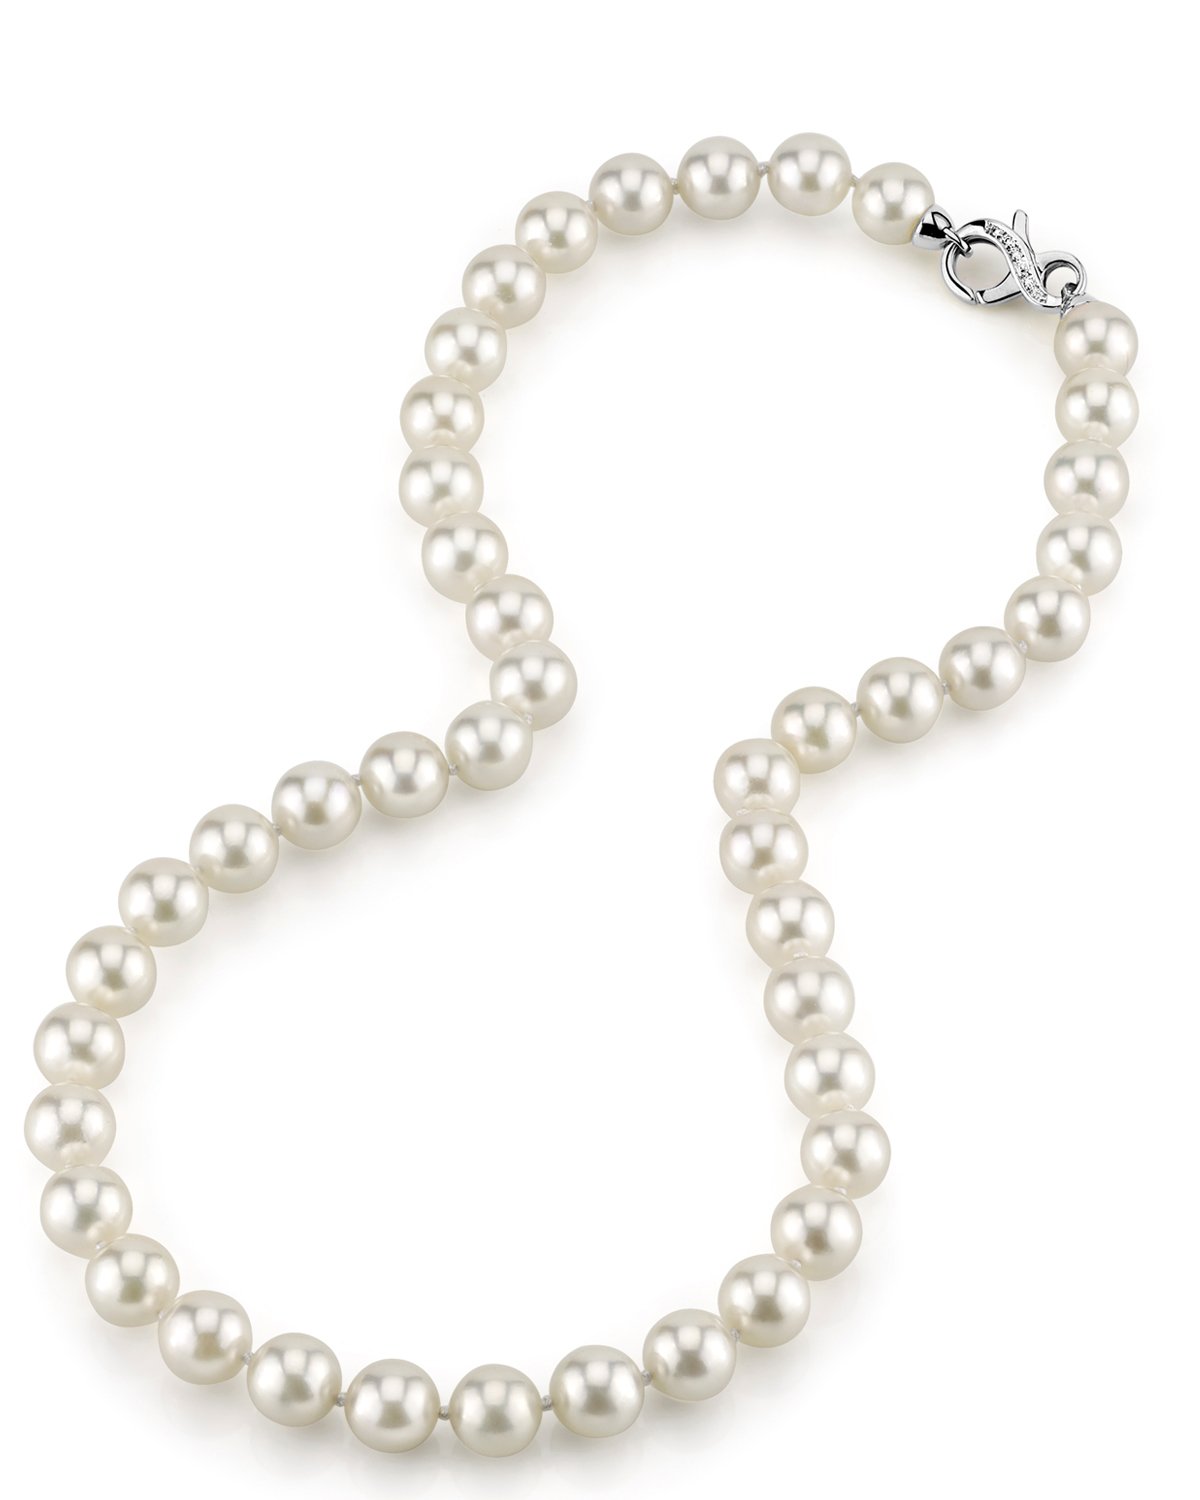 White Japanese Akoya Pearl Necklace, 9.0-9.5mm - AAA Quality